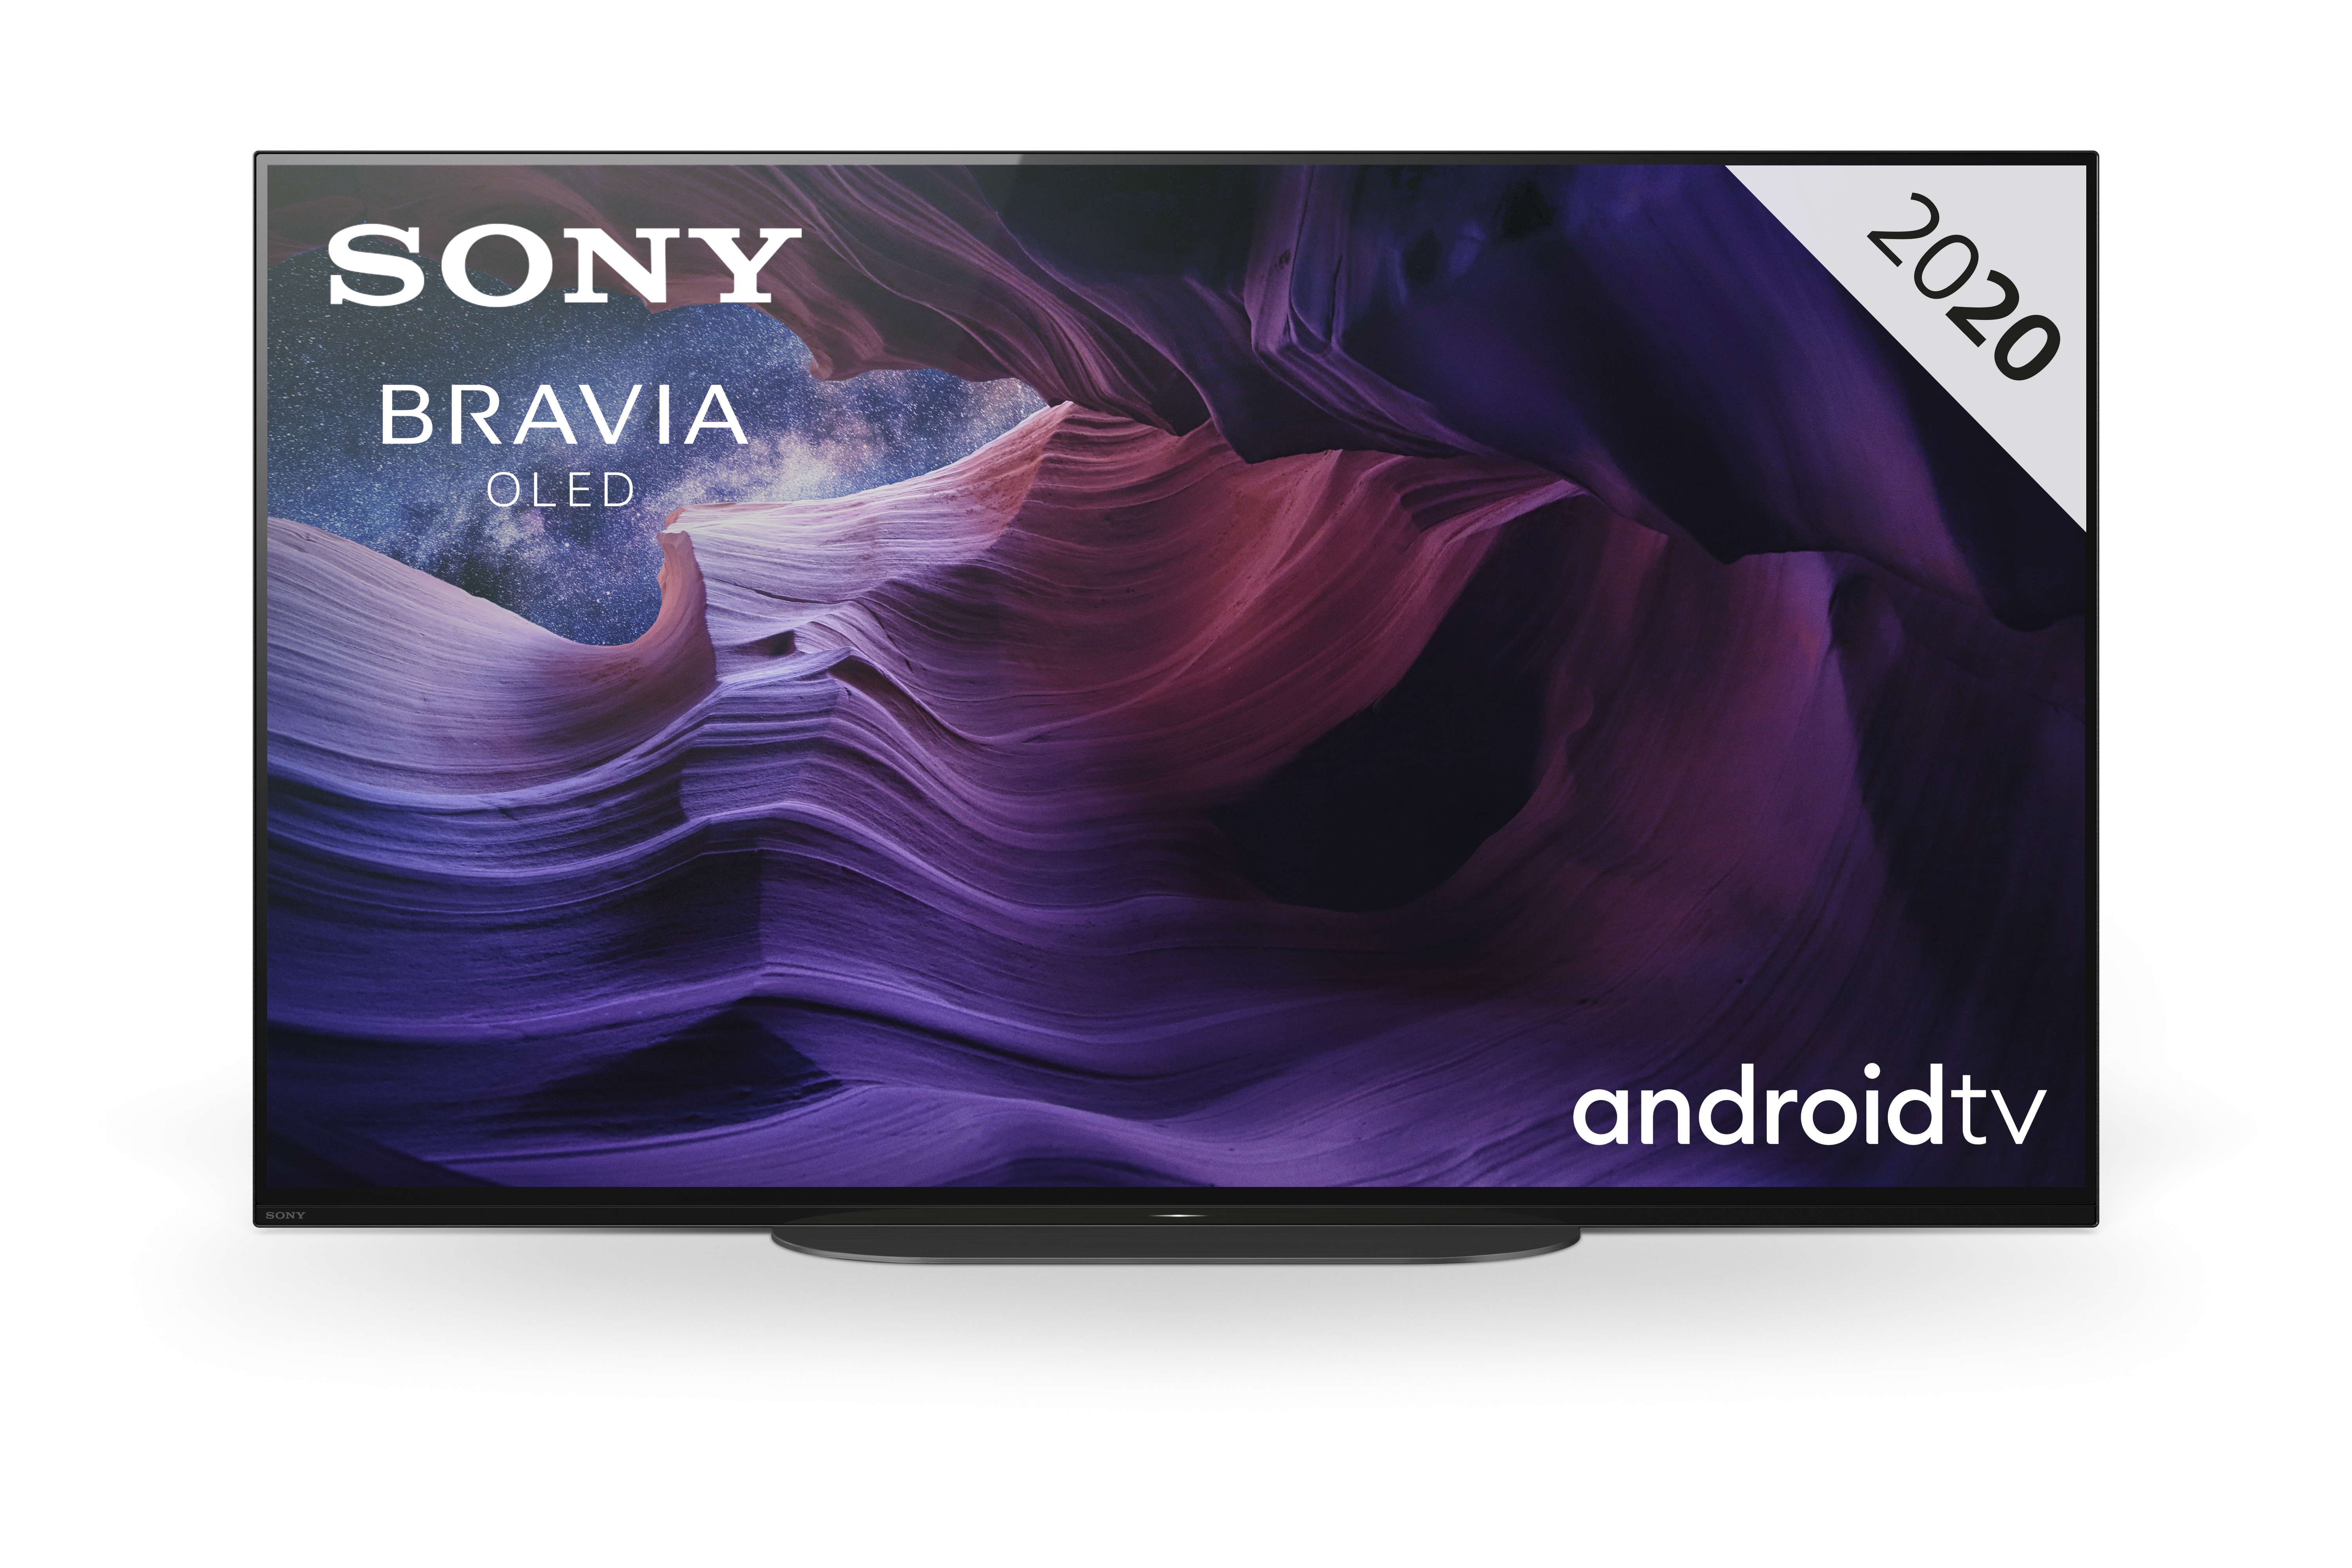 Sony Kd-48a9 4k Hdr Oled Android Tv (48 Inch) online kopen